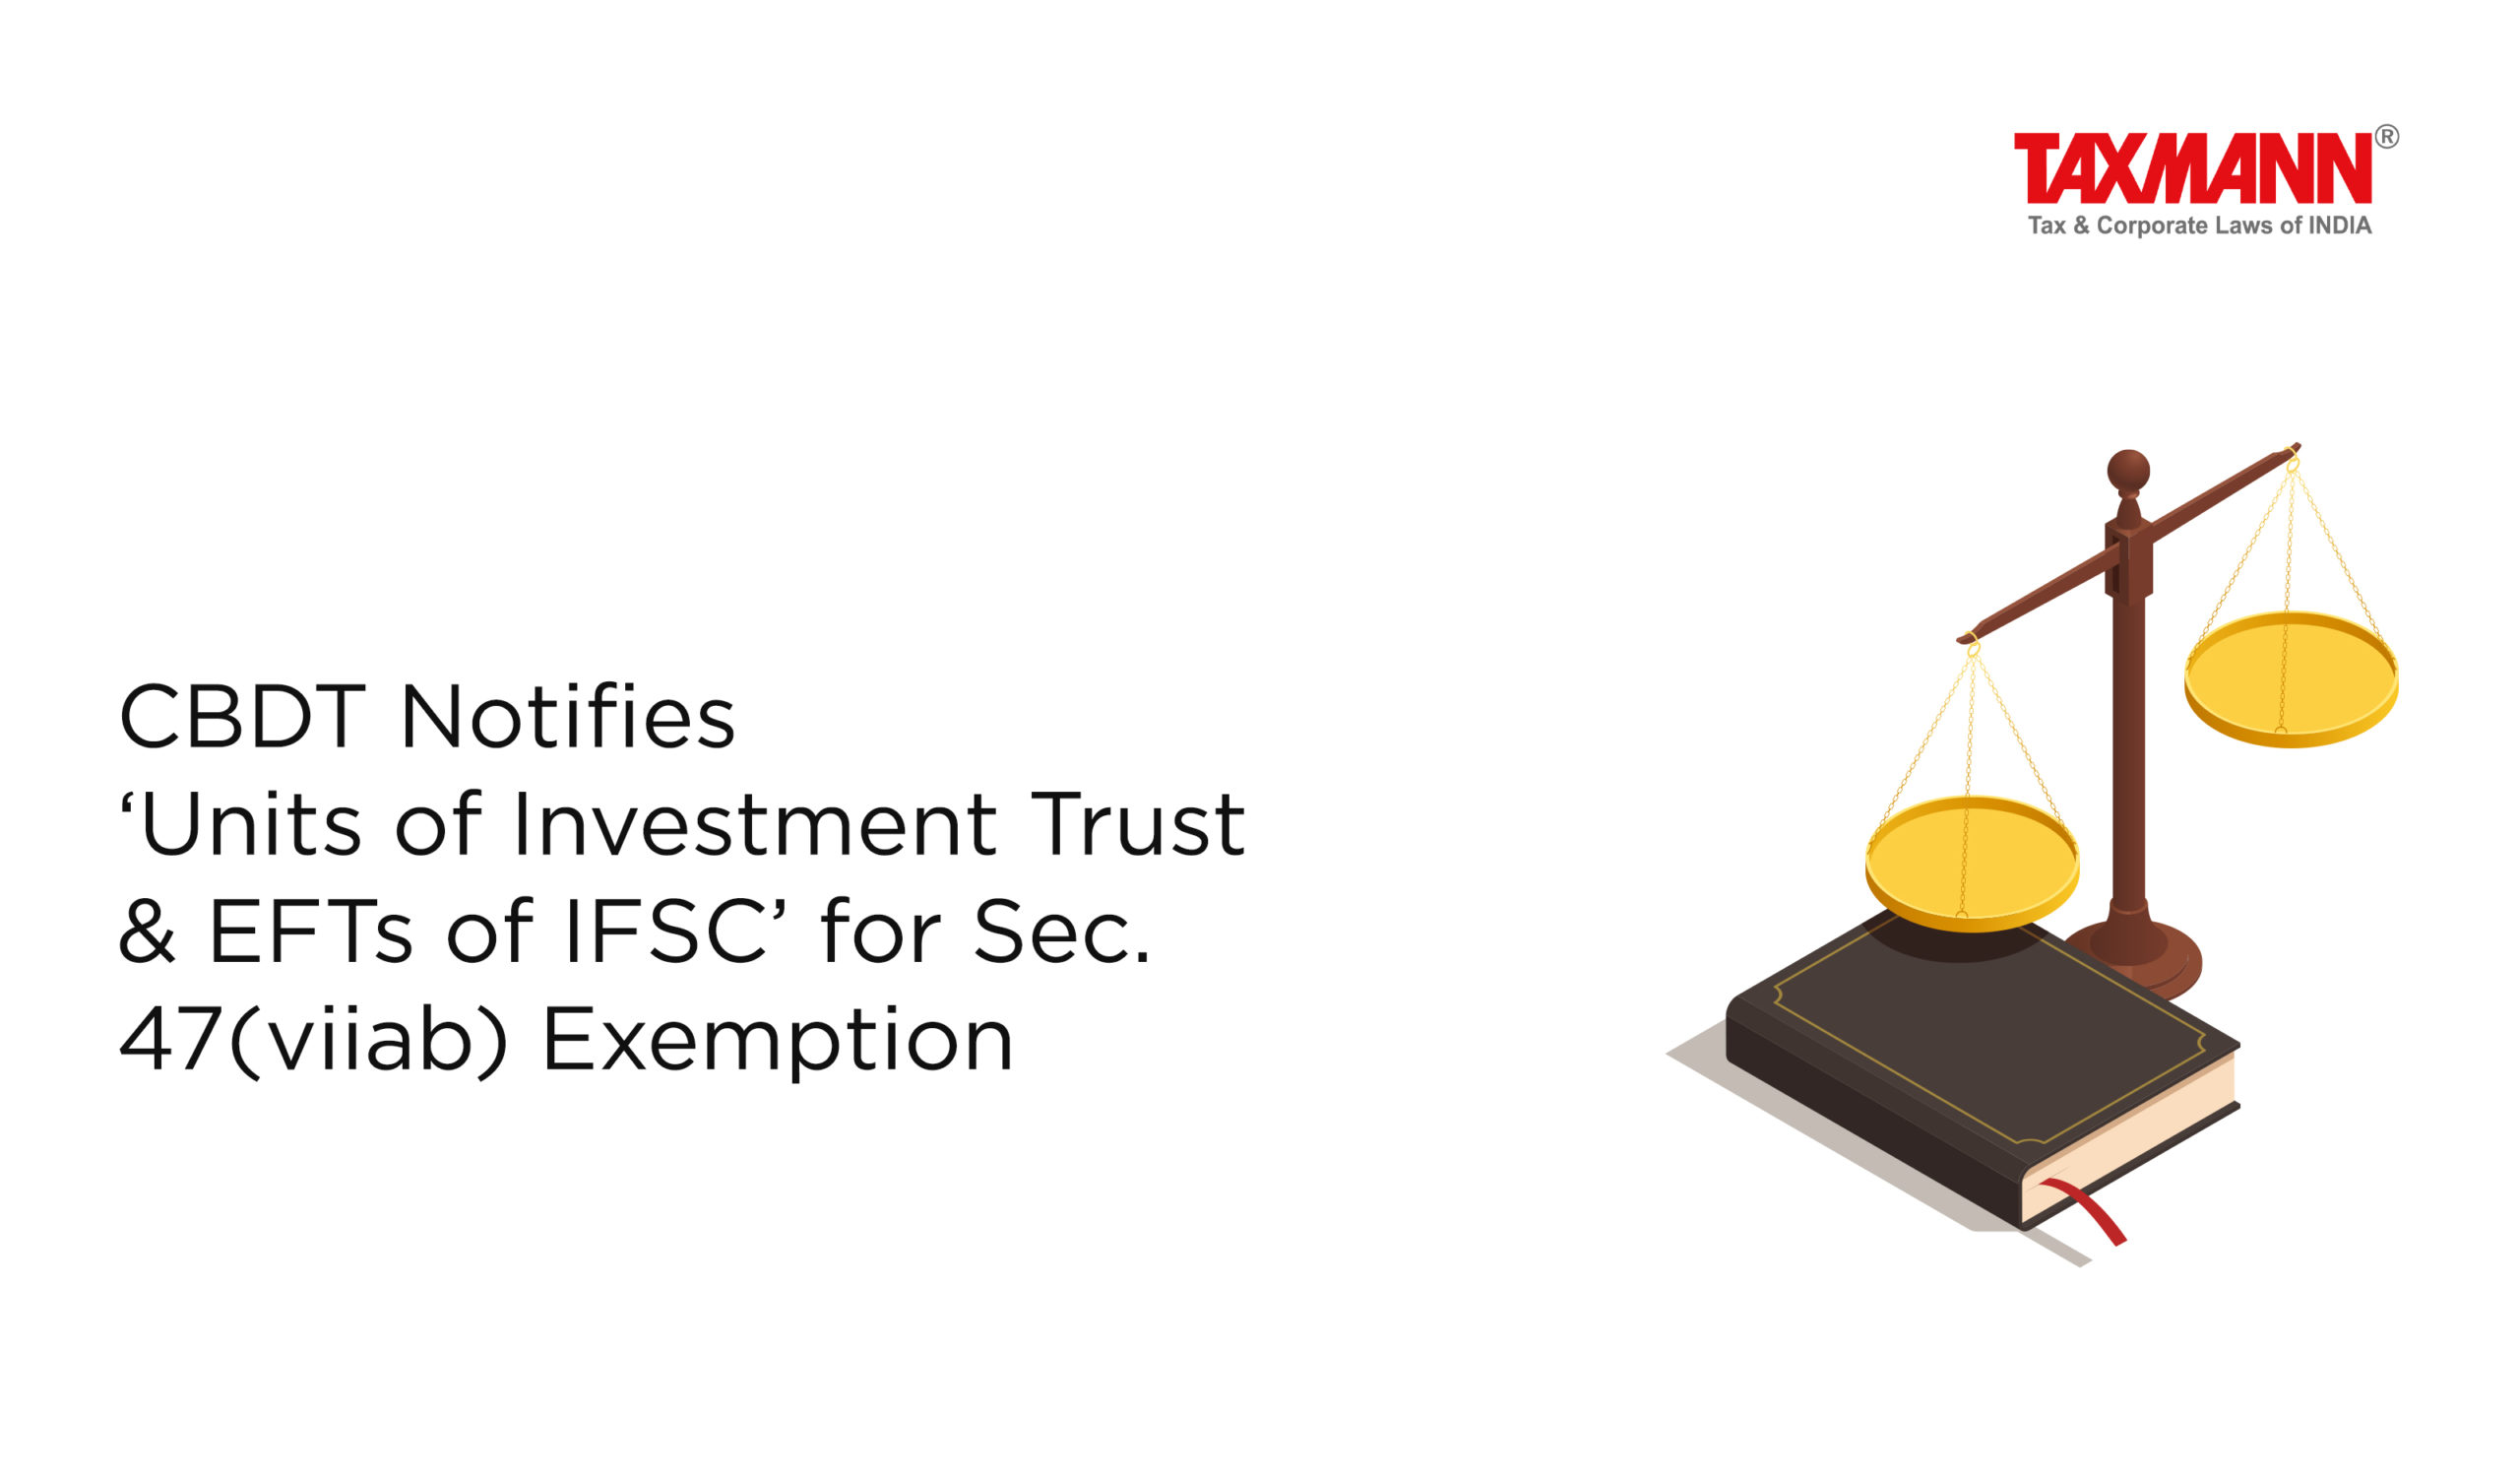 Units of Investment Trust & EFTs of IFSC